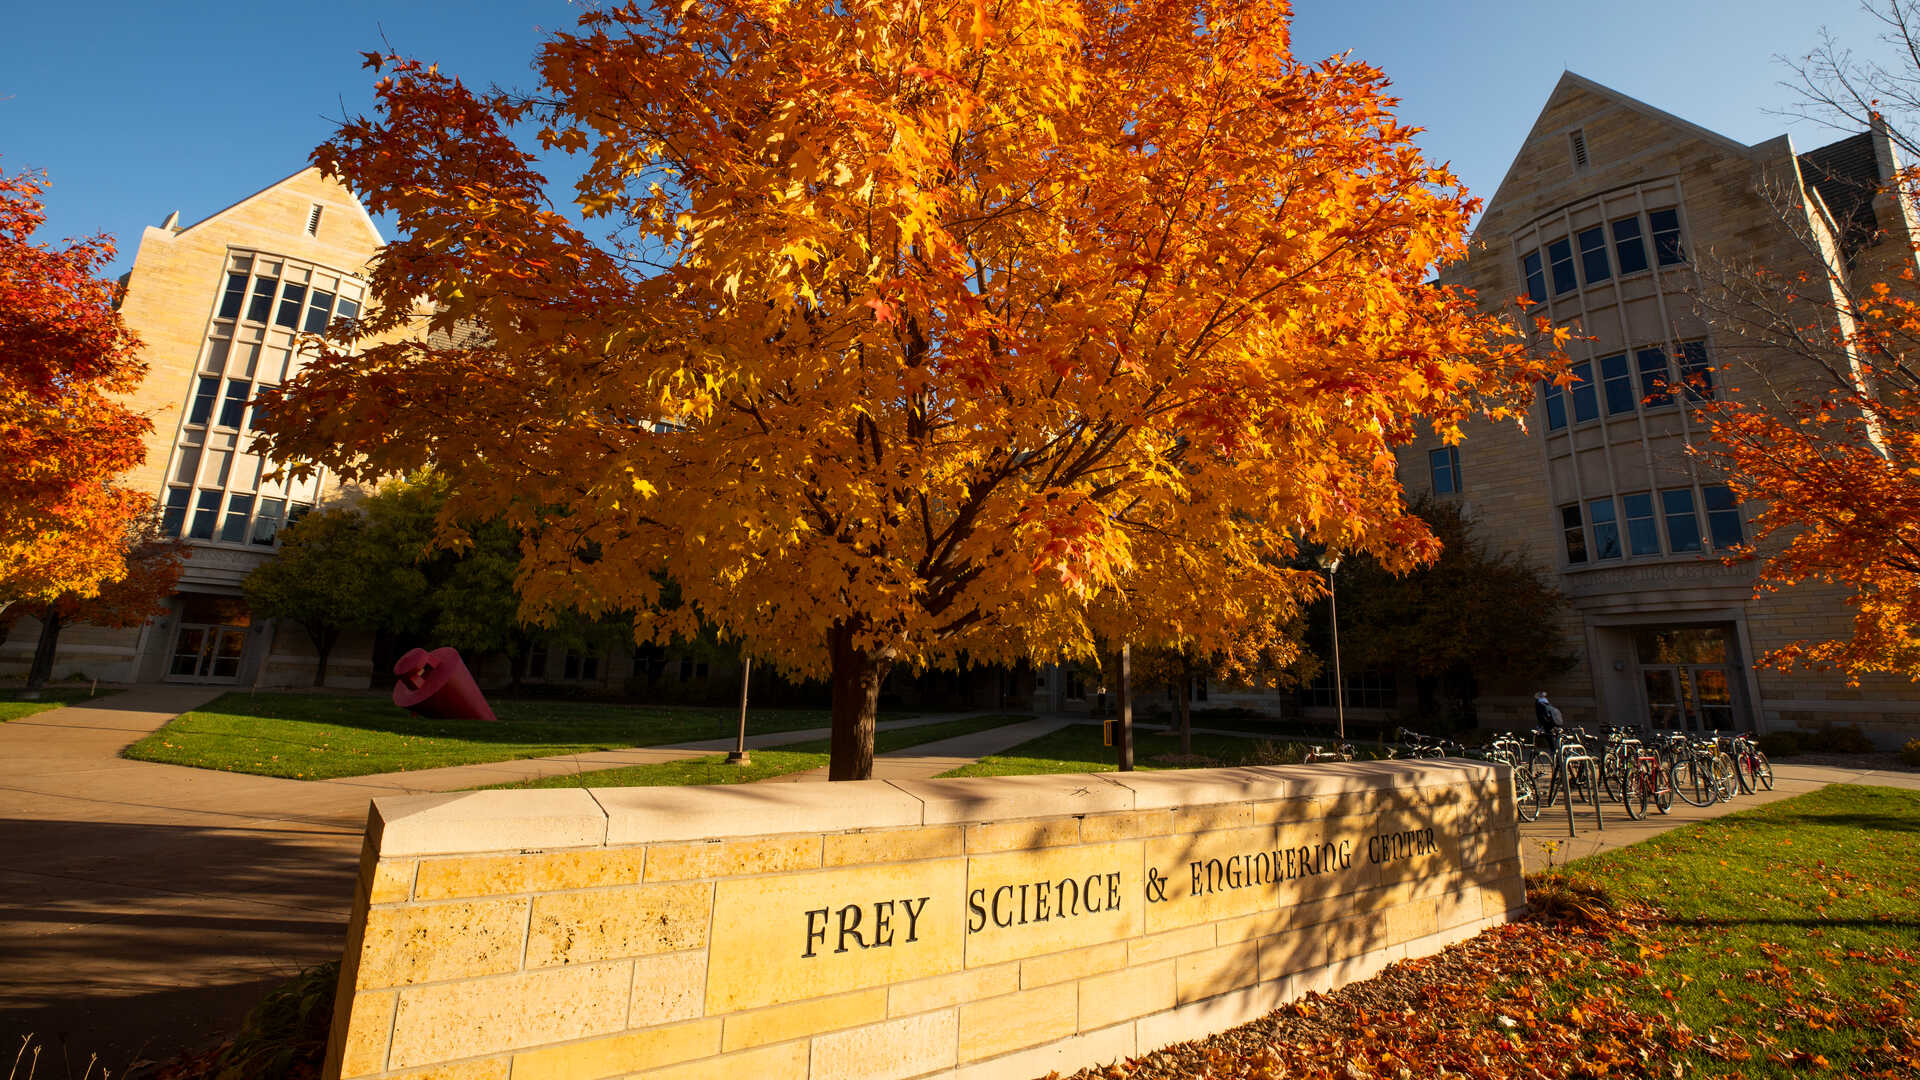 St. Thomas Frey Science and Engineering Center